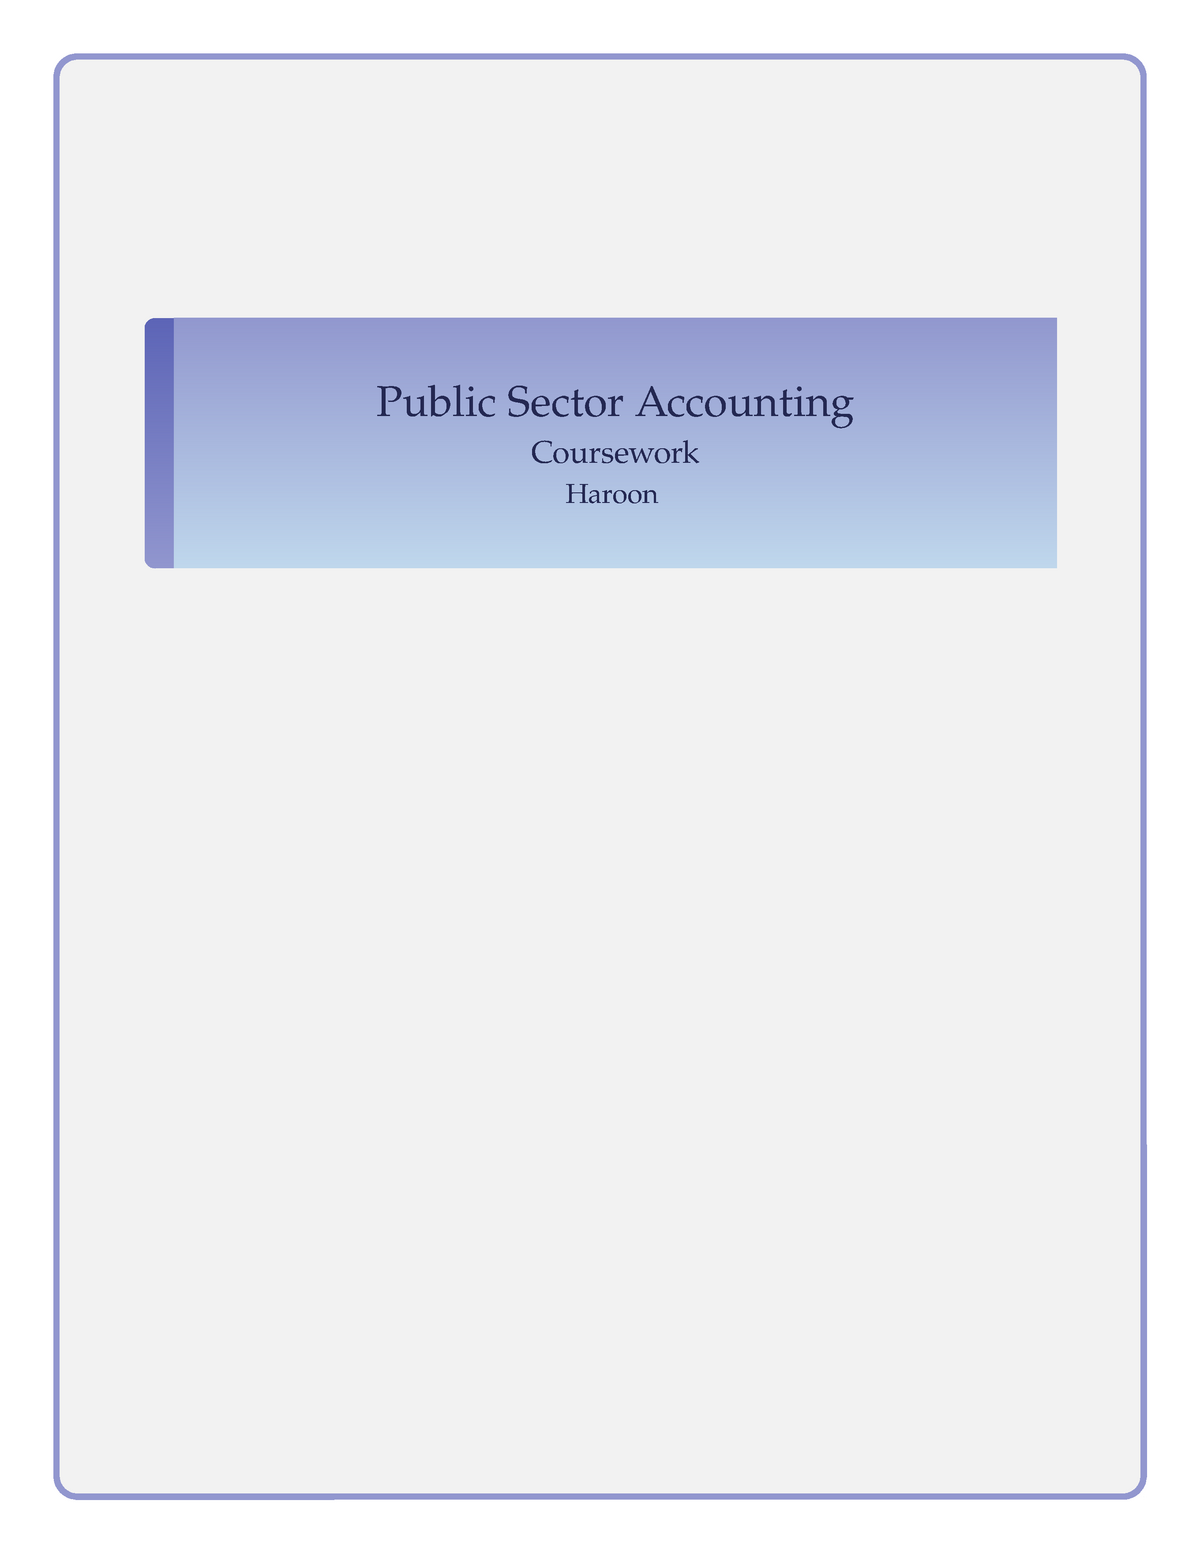 Public Sector Accounting Coursework - Public Sector Accounting ...